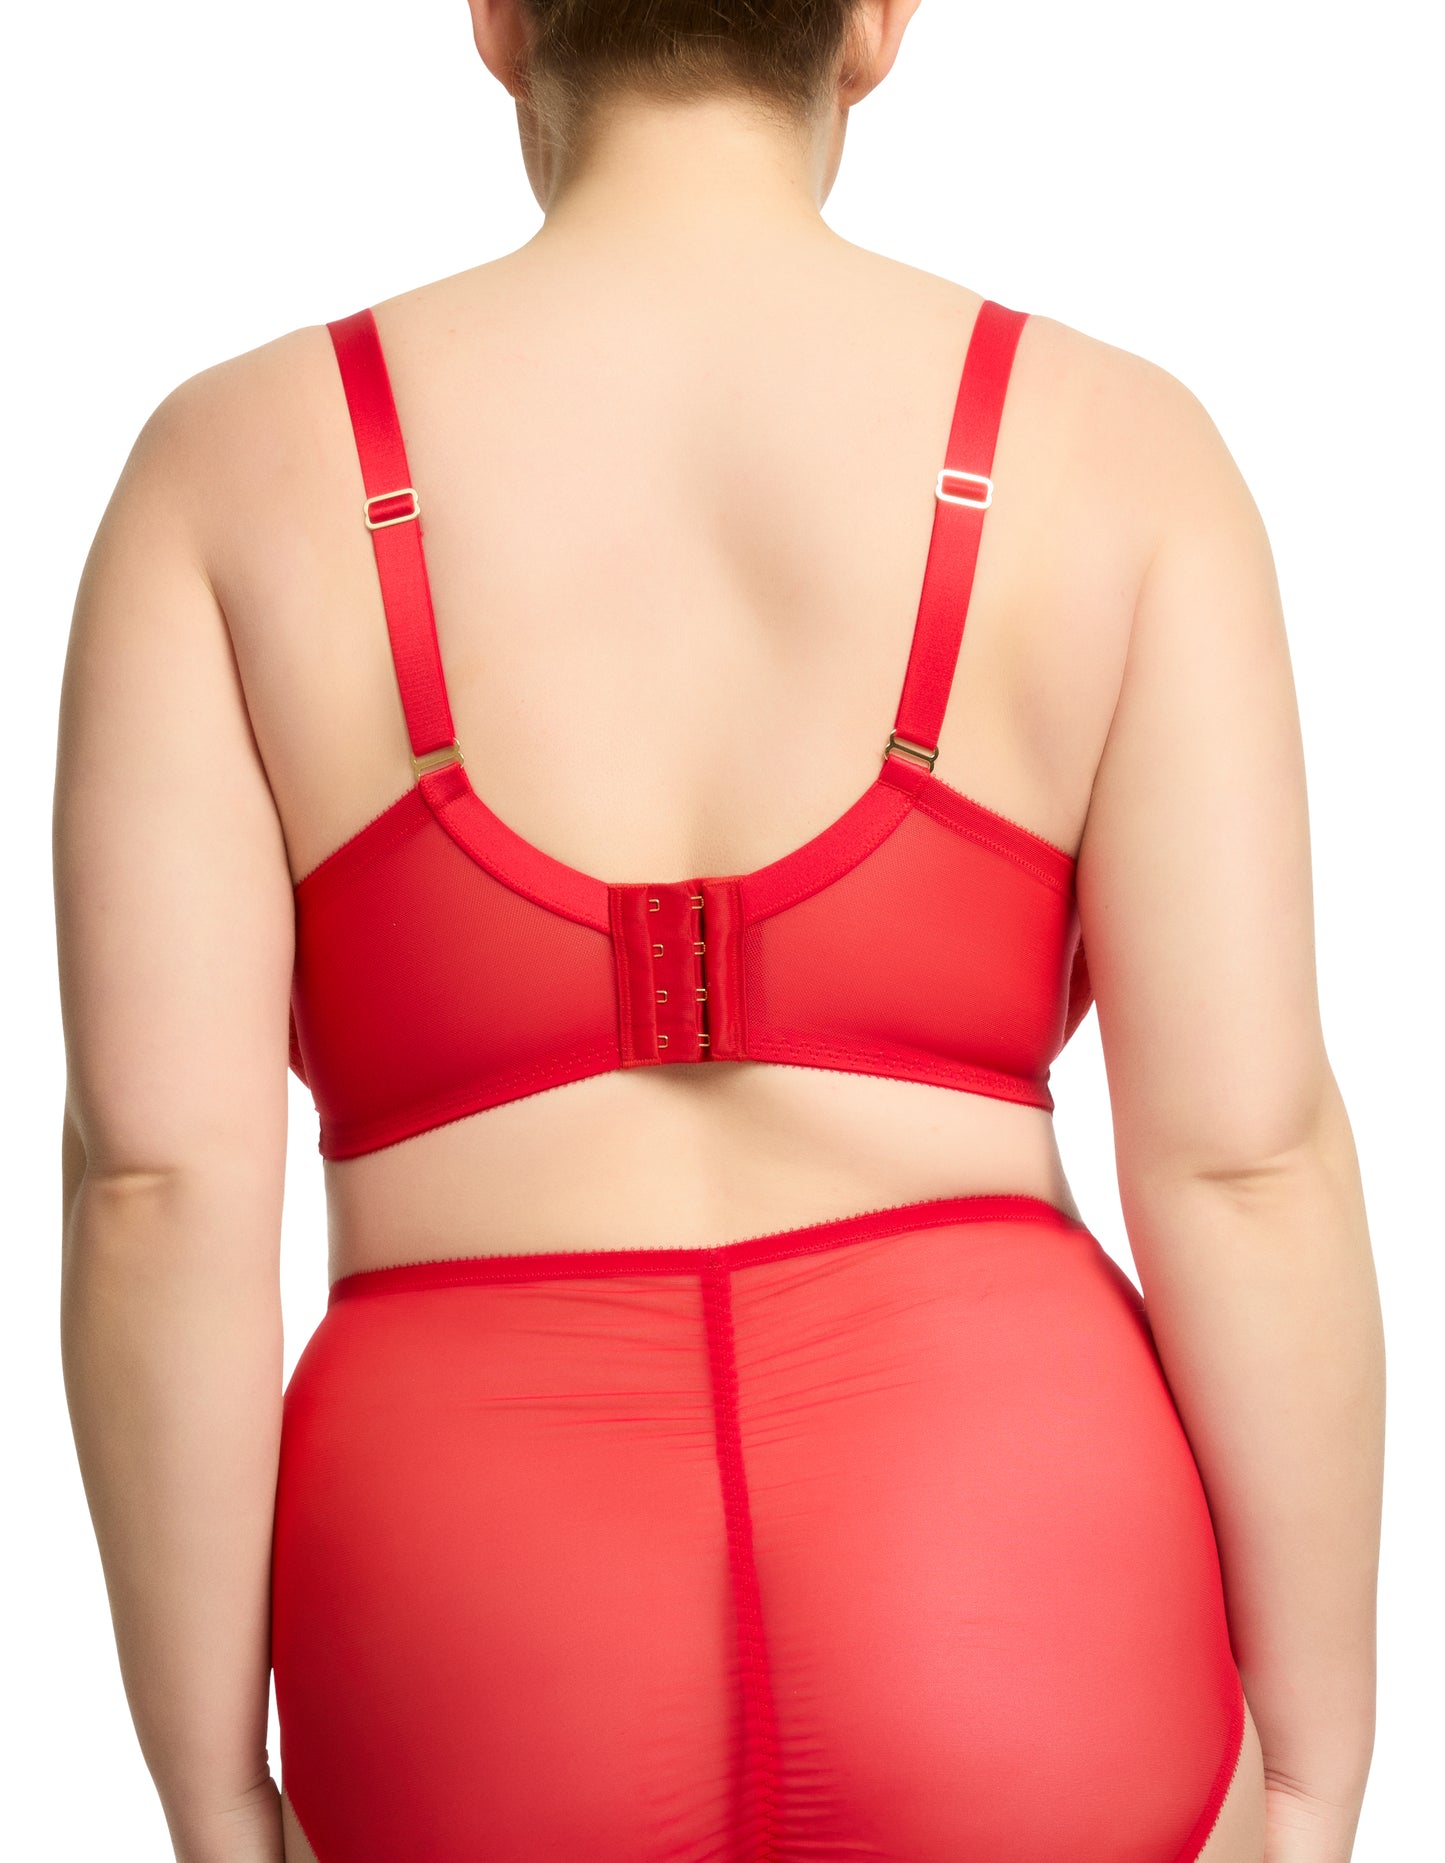 Vedette In Flame Red Curve Plunge Bra By Dita Von Teese - 38-44 D-G (UK)